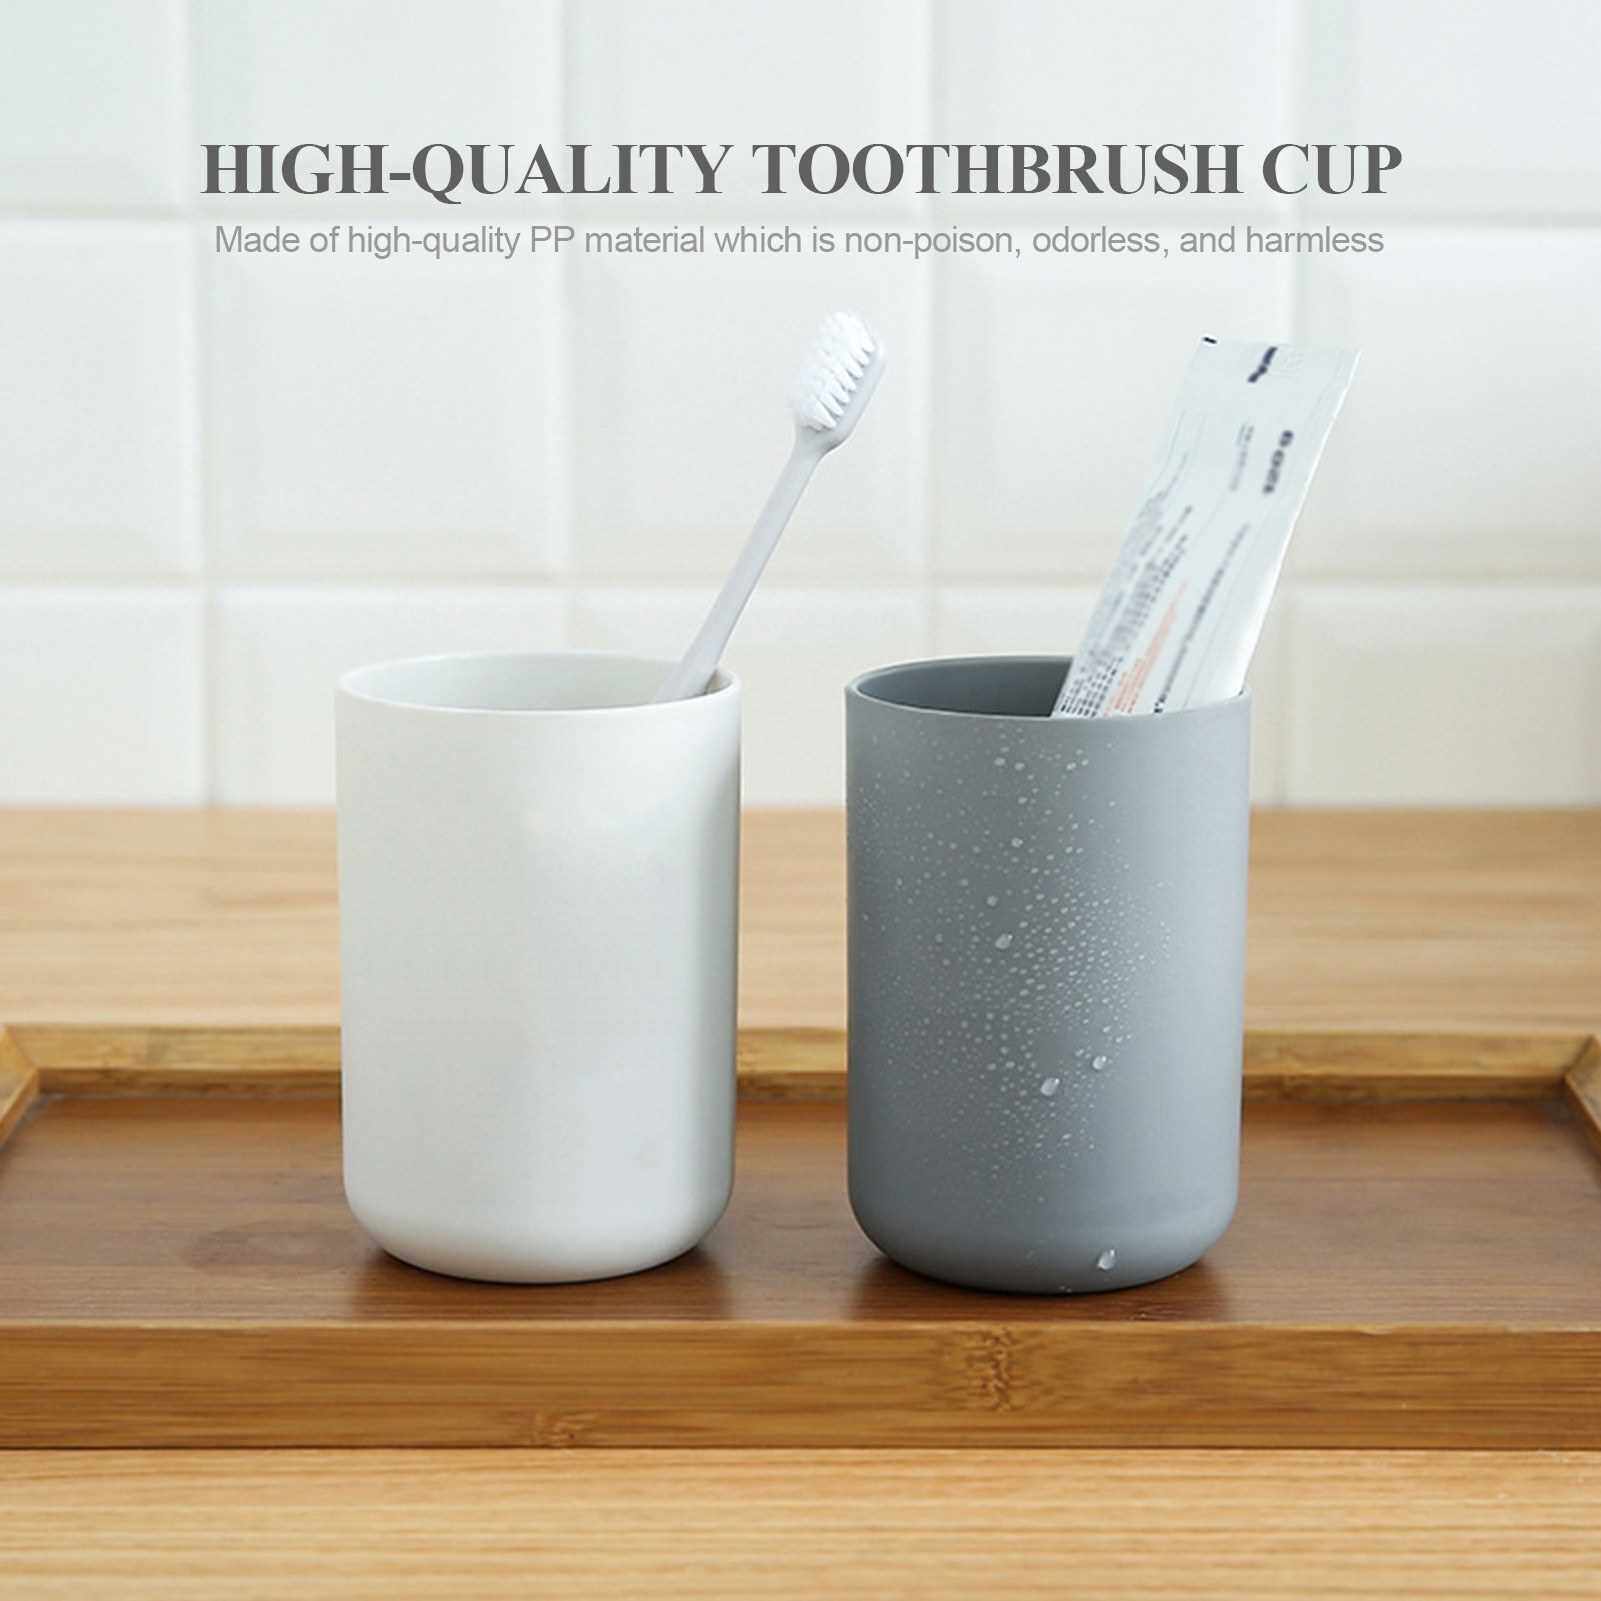 People's Choice 300mL Toothbrush Cup for Bathroom Toothpaste Toothbrush Holder Electric Toothbrush Case Makeup Brush Storage Organizer Countertop Organizer Stand Cup (Grey)